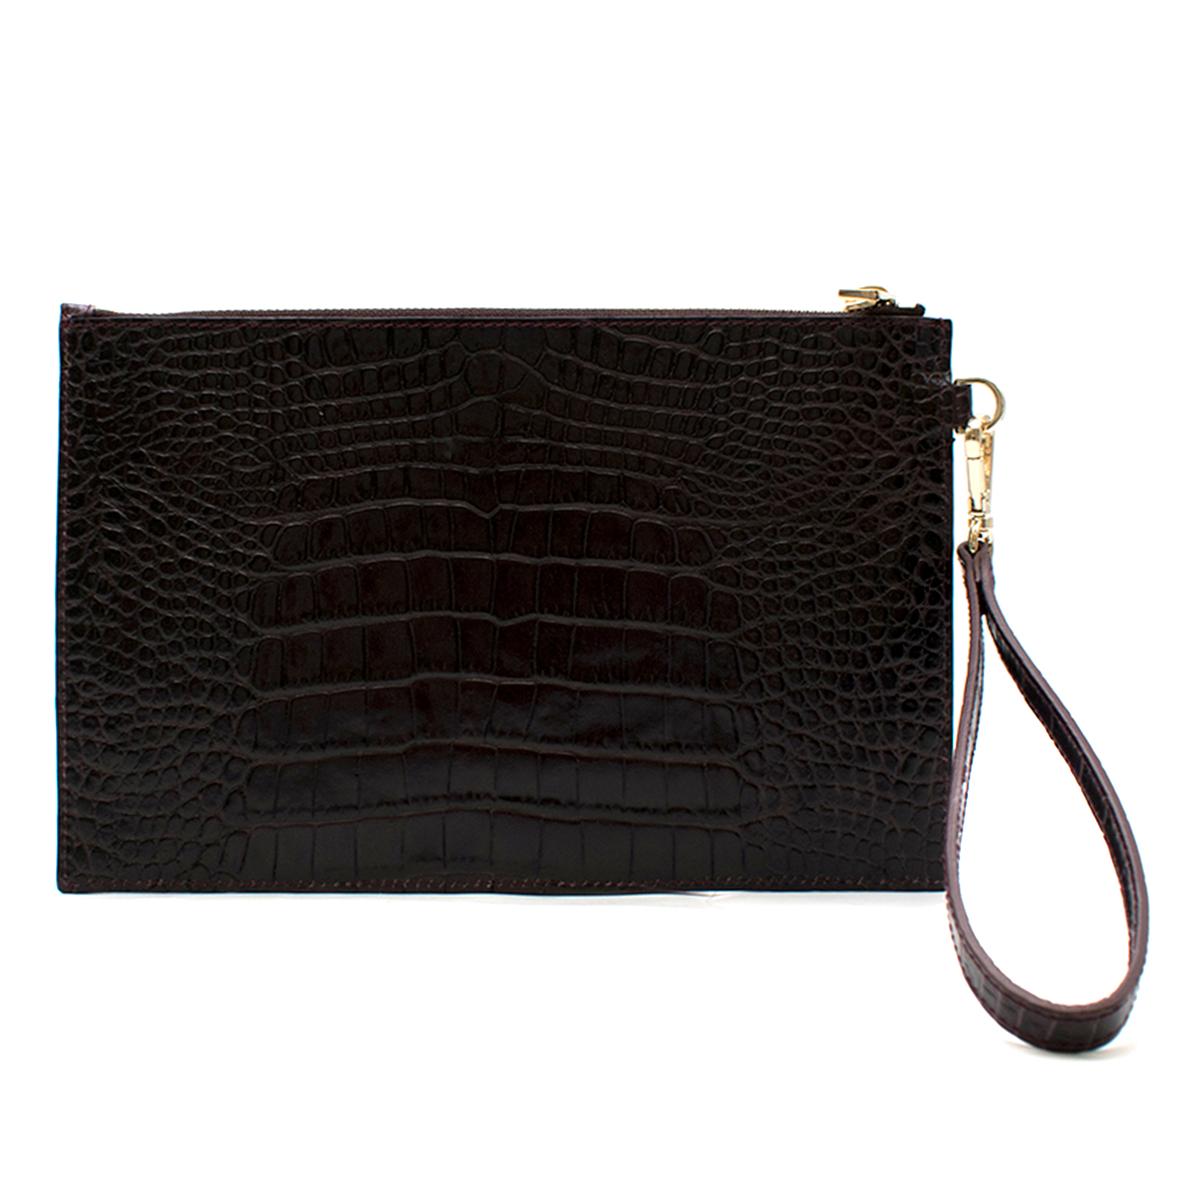 Scanlan Theodore Purple Envelope

- Dark Purple Envelope Bag 
- Croc-effect leather 
- Gold toned zip closure 
- De-tachable bracelet handle with gold toned metal 

Please note, these items are pre-owned and may show some signs of storage, even when